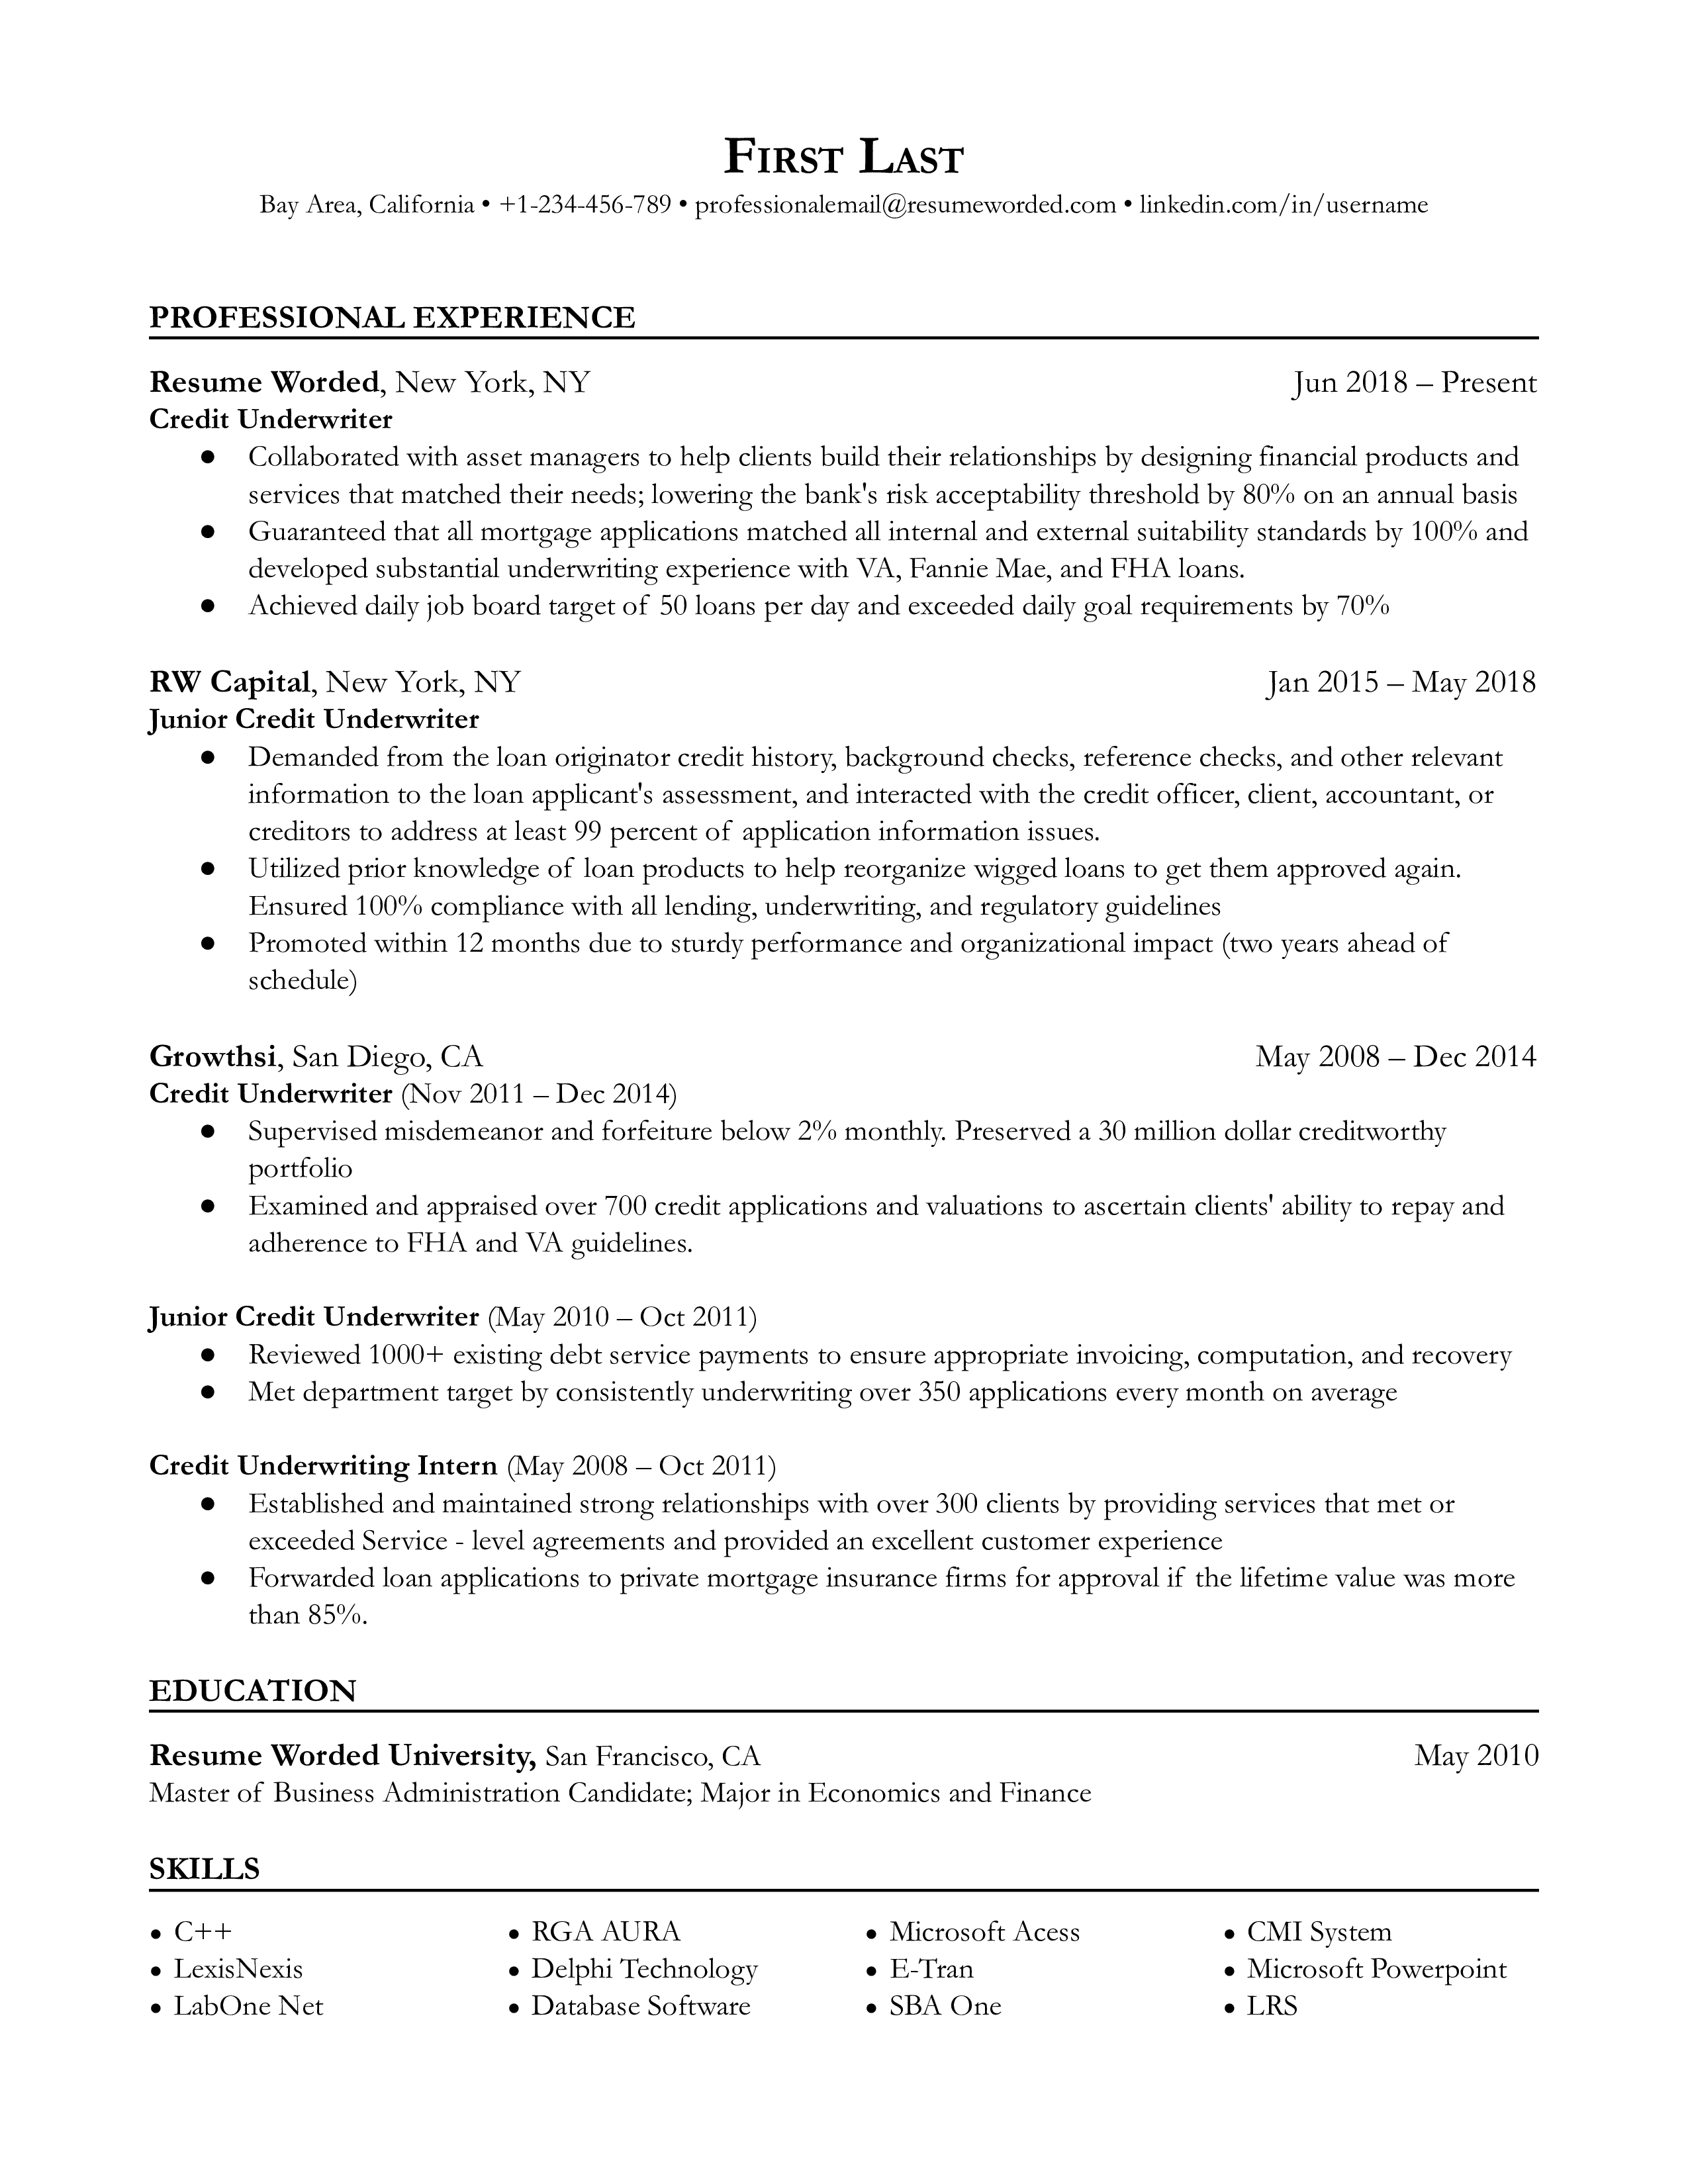 A credit underwriter's resume template is shown as an example of how to write an impressive resume.